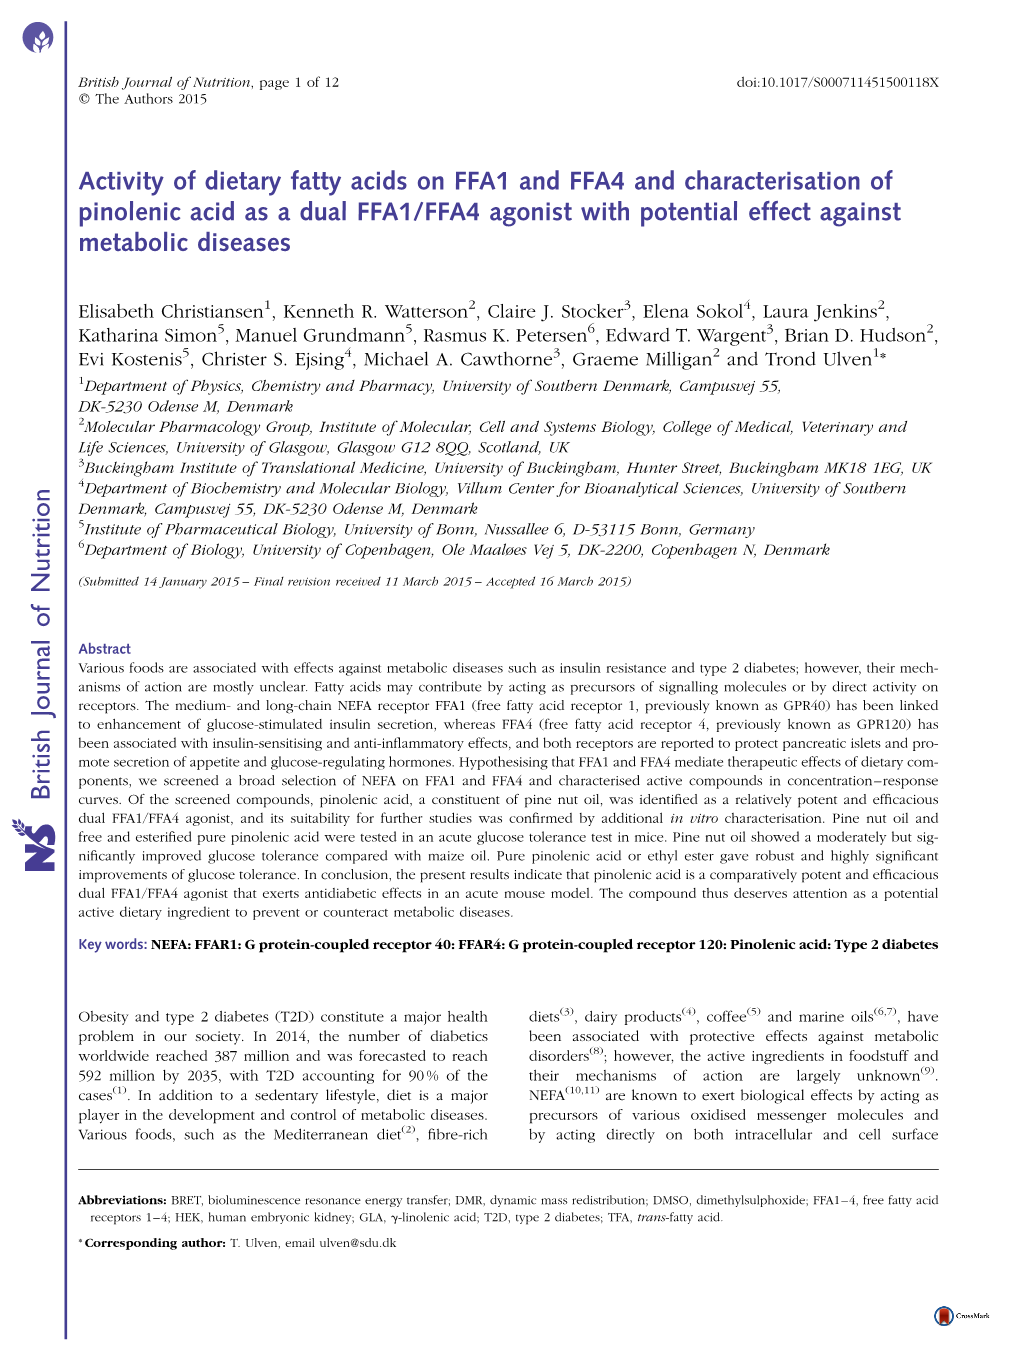 Activity of Dietary Fatty Acids on FFA1 and FFA4 and Characterisation of Pinolenic Acid As a Dual FFA1/FFA4 Agonist with Potential Effect Against Metabolic Diseases